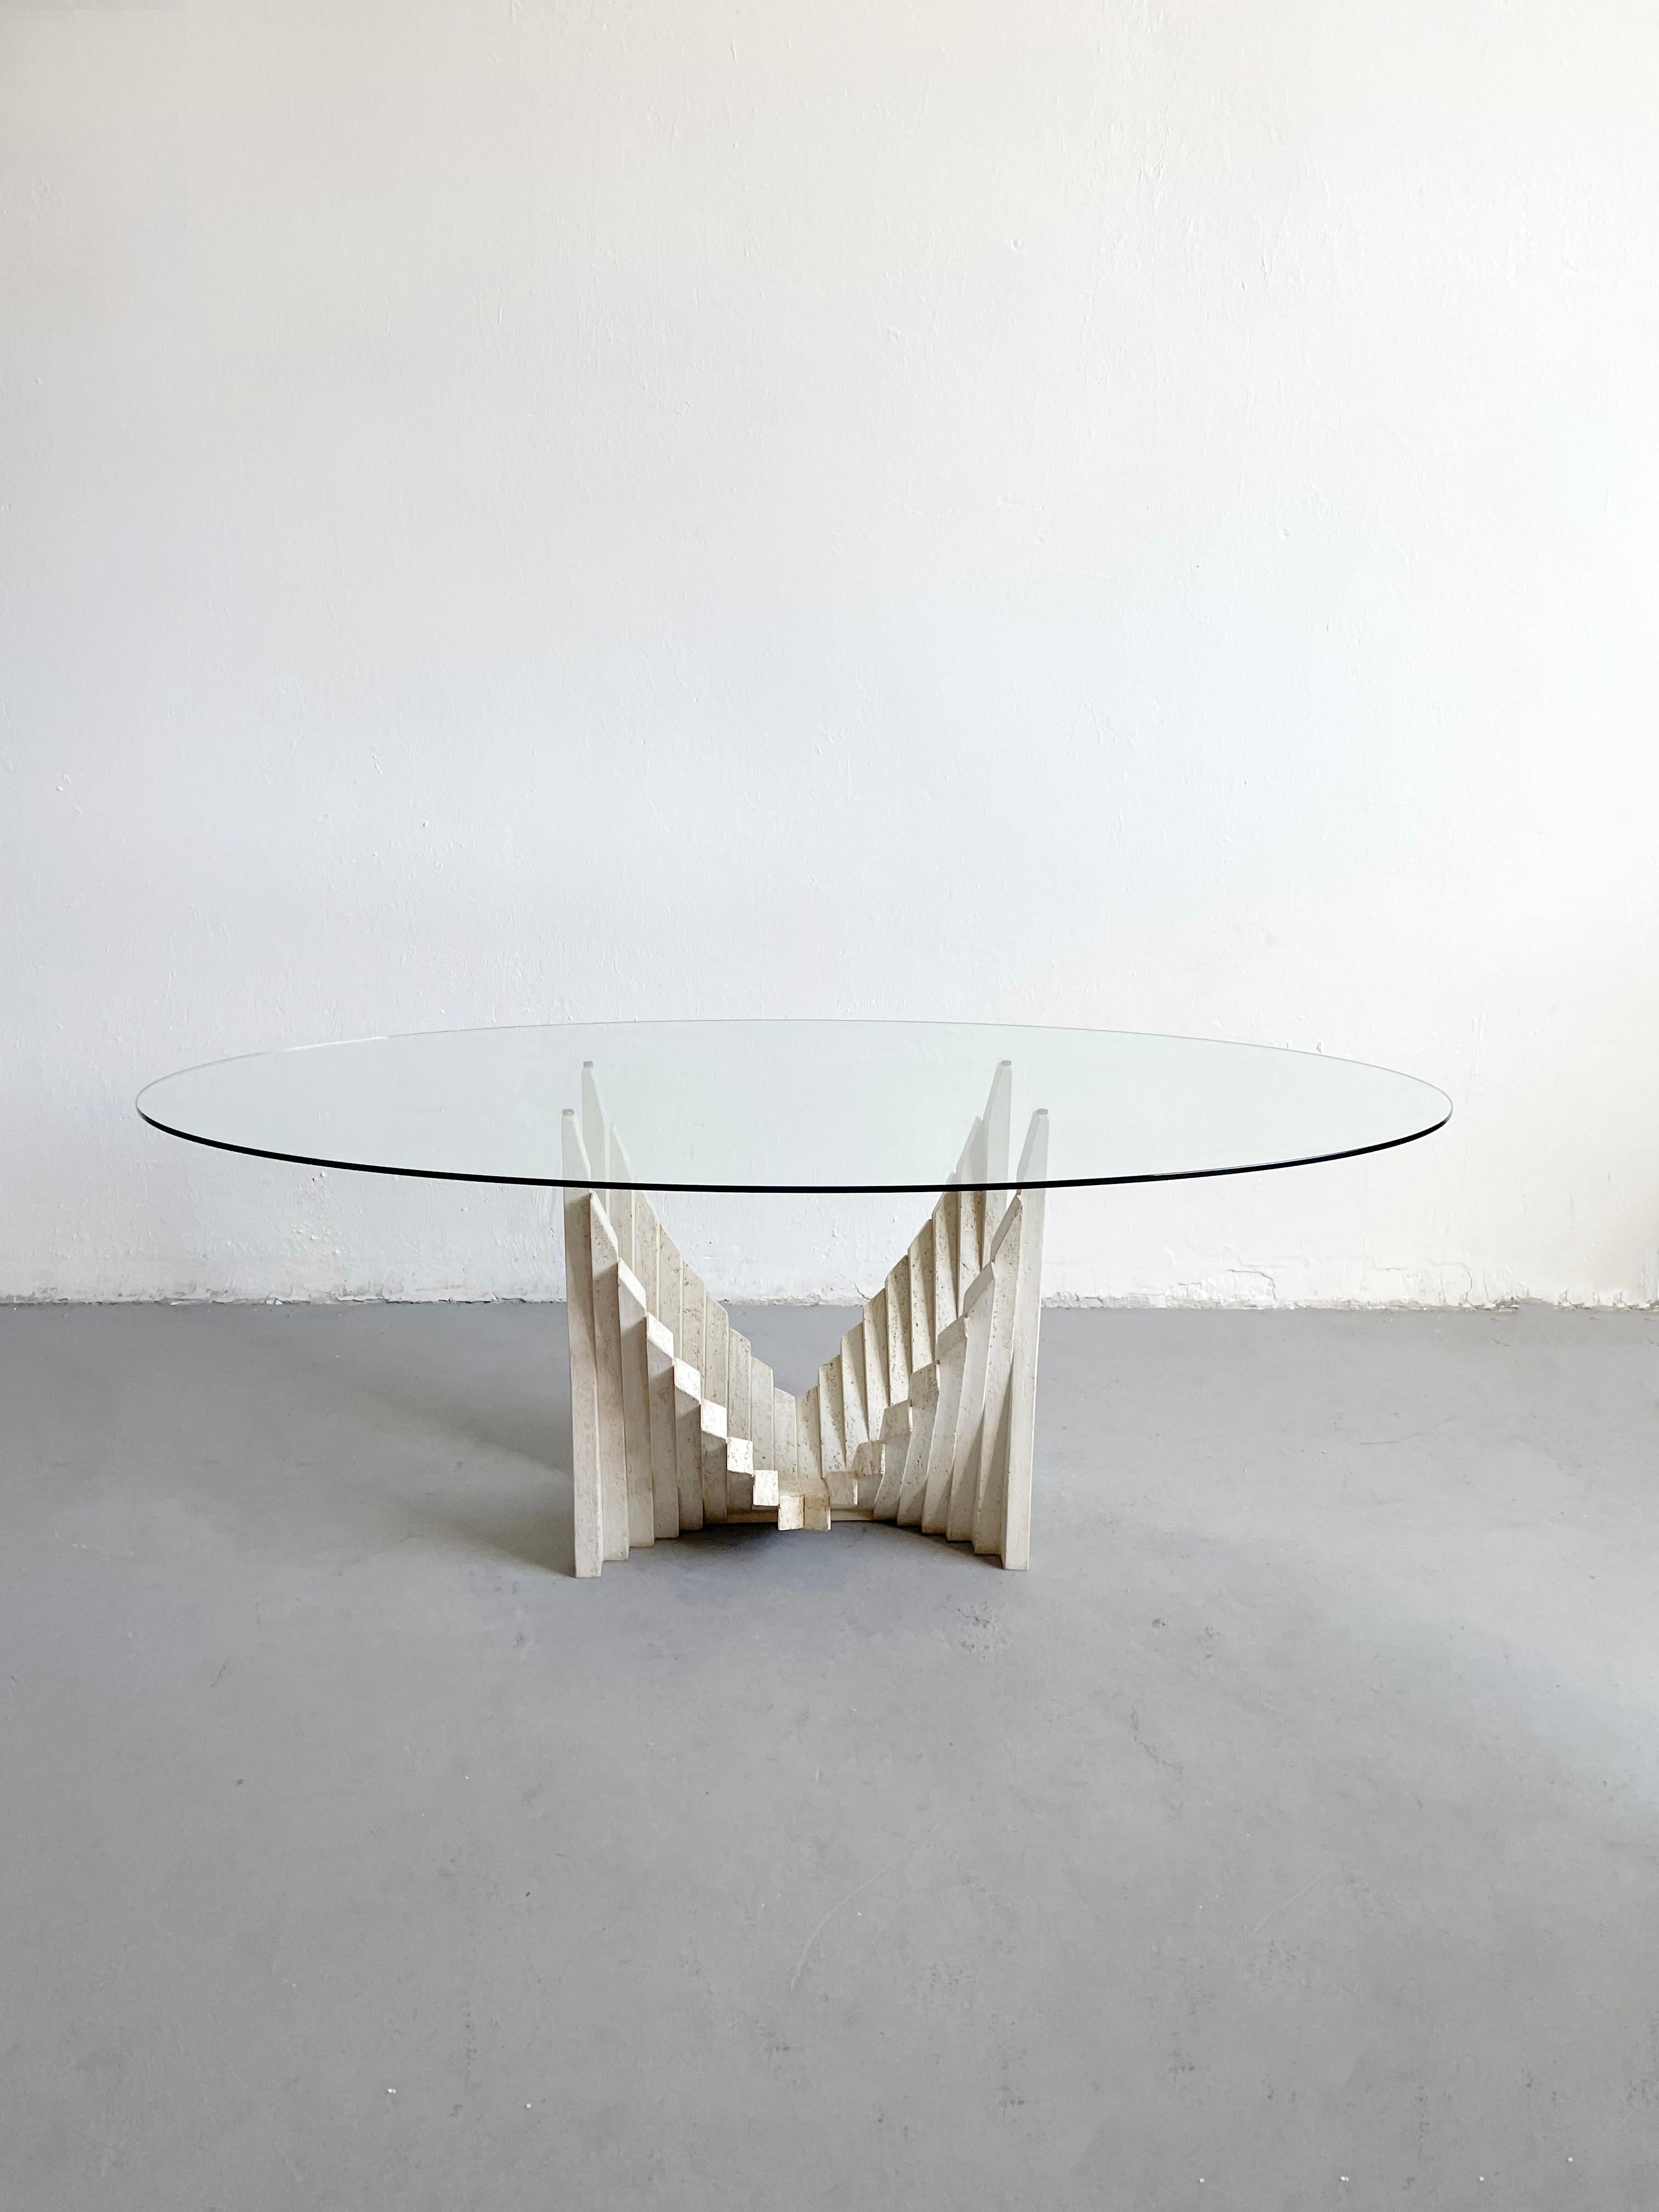 Sculptural Italian Brutalist Dining Table from the 1970s, Travertine and Glass 13